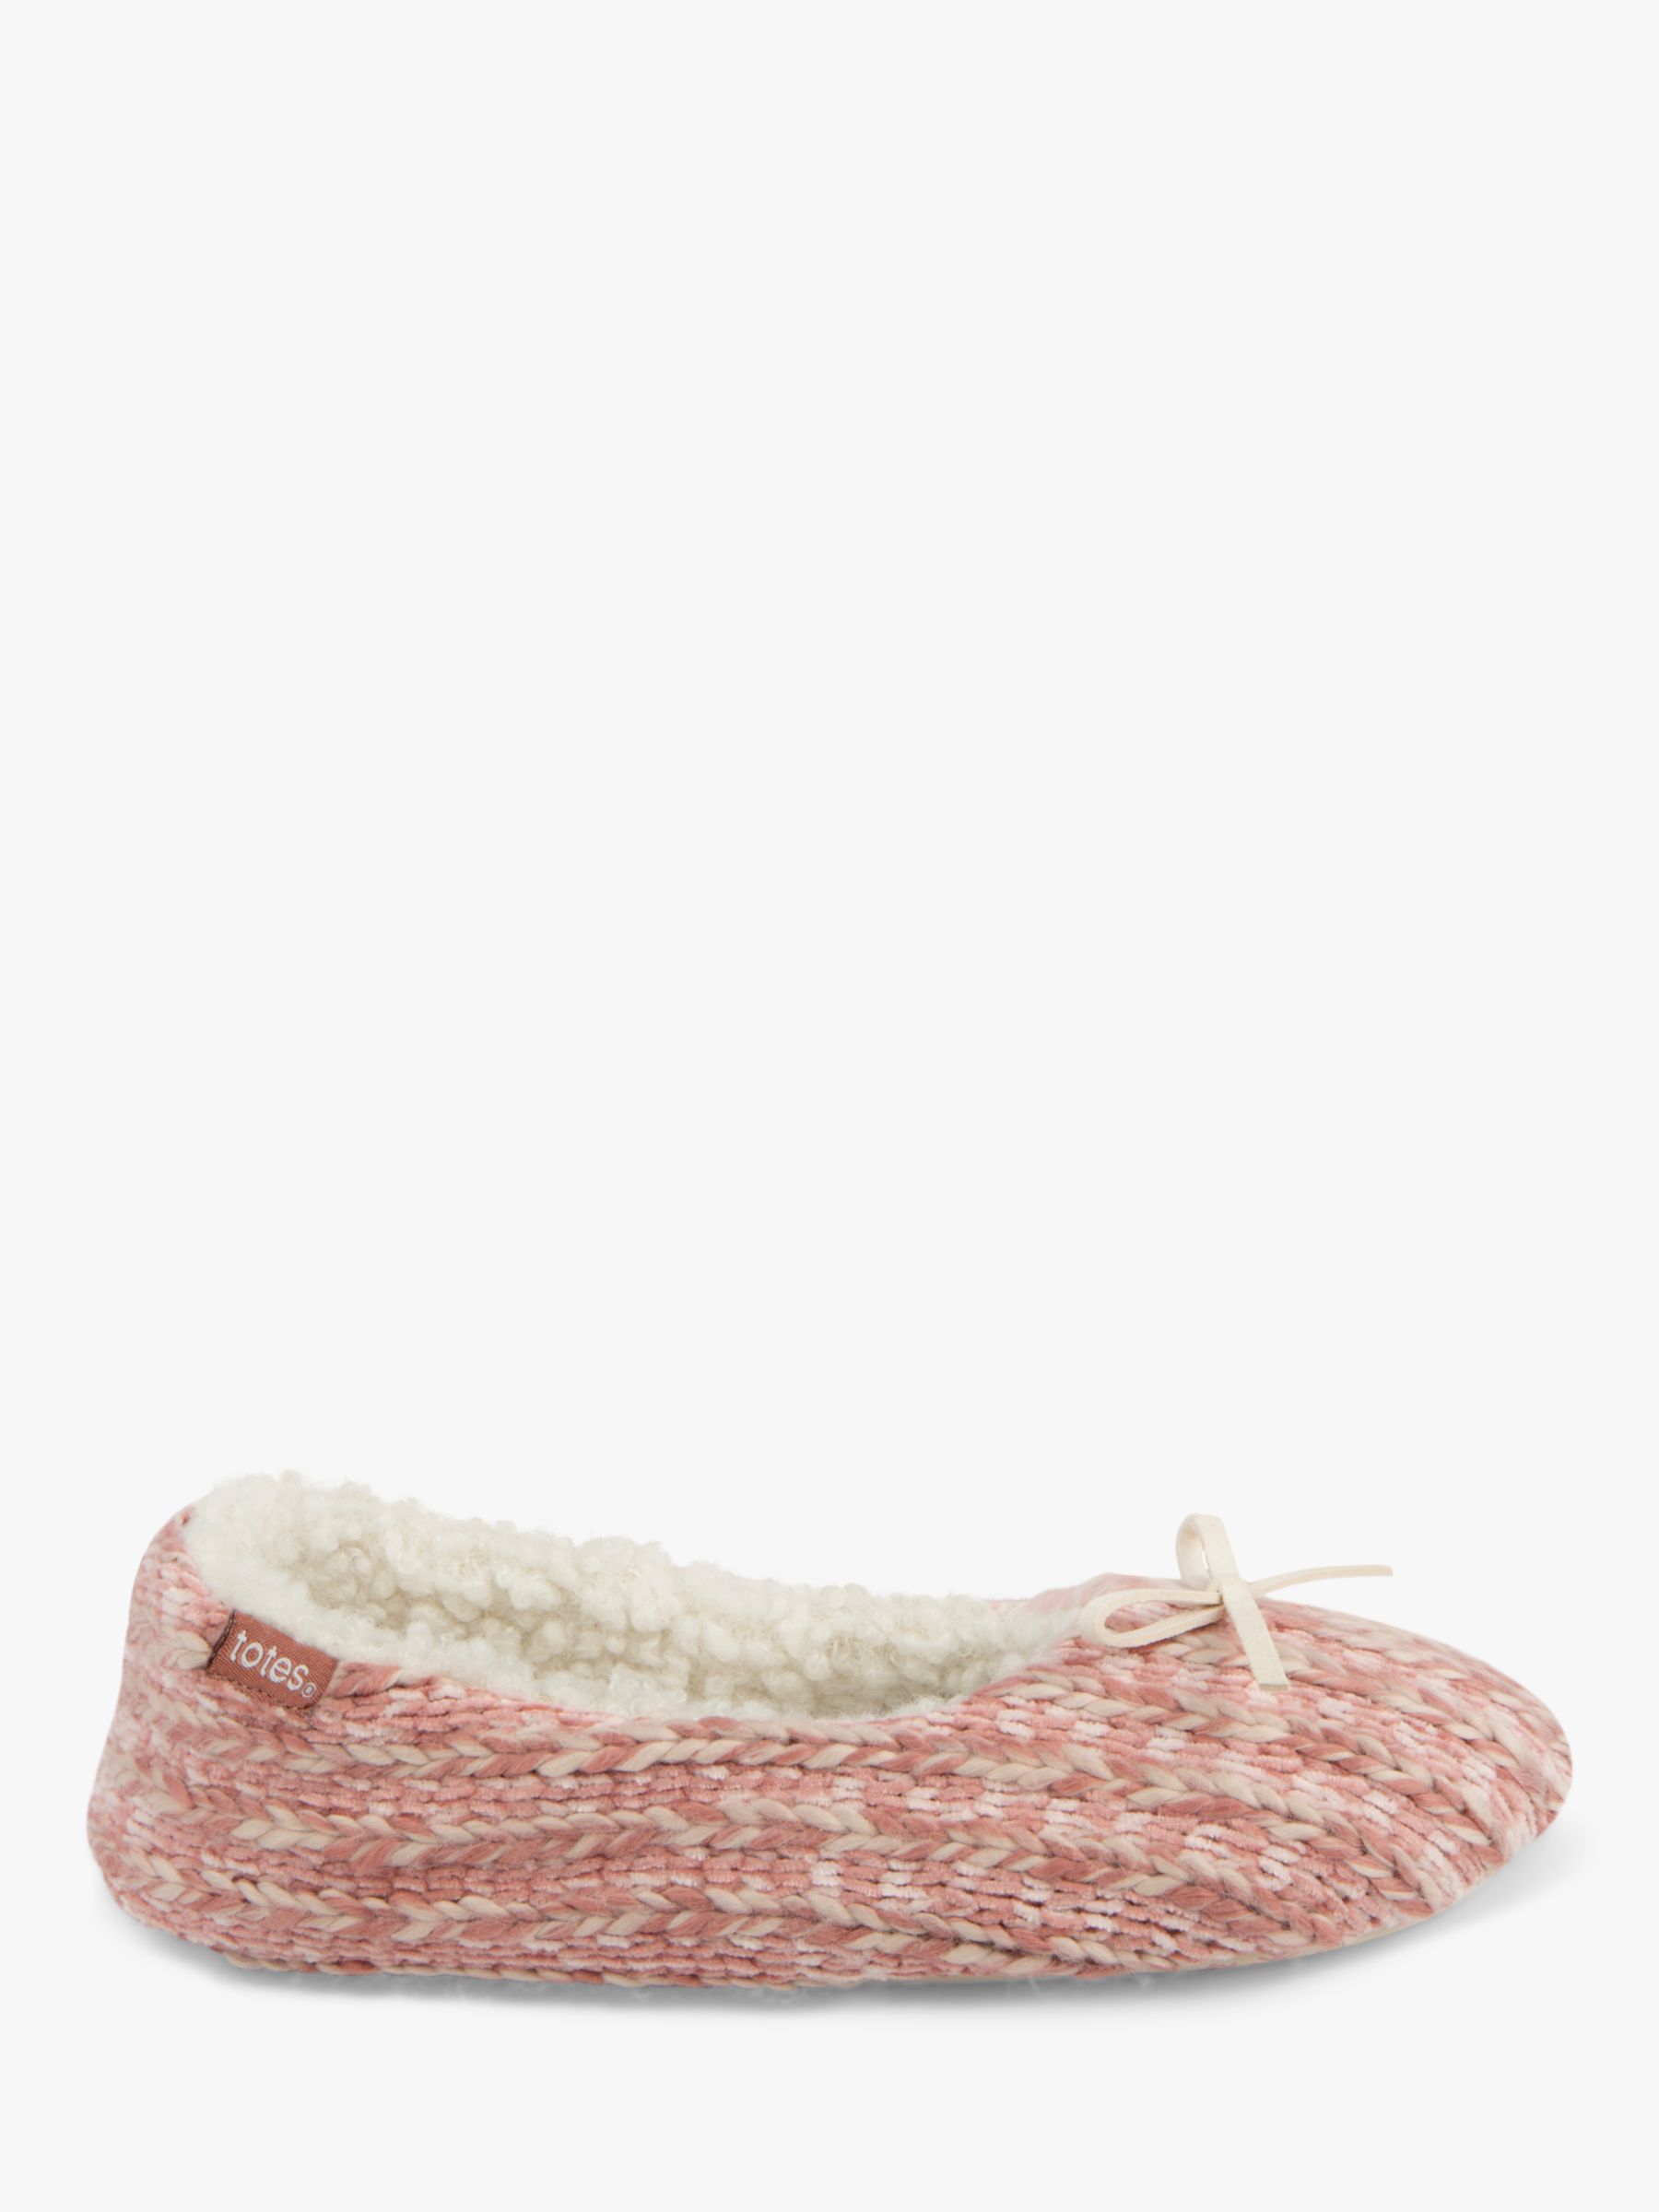 Buy totes Knitted Ballet Slippers, Pink/Cream Online at johnlewis.com